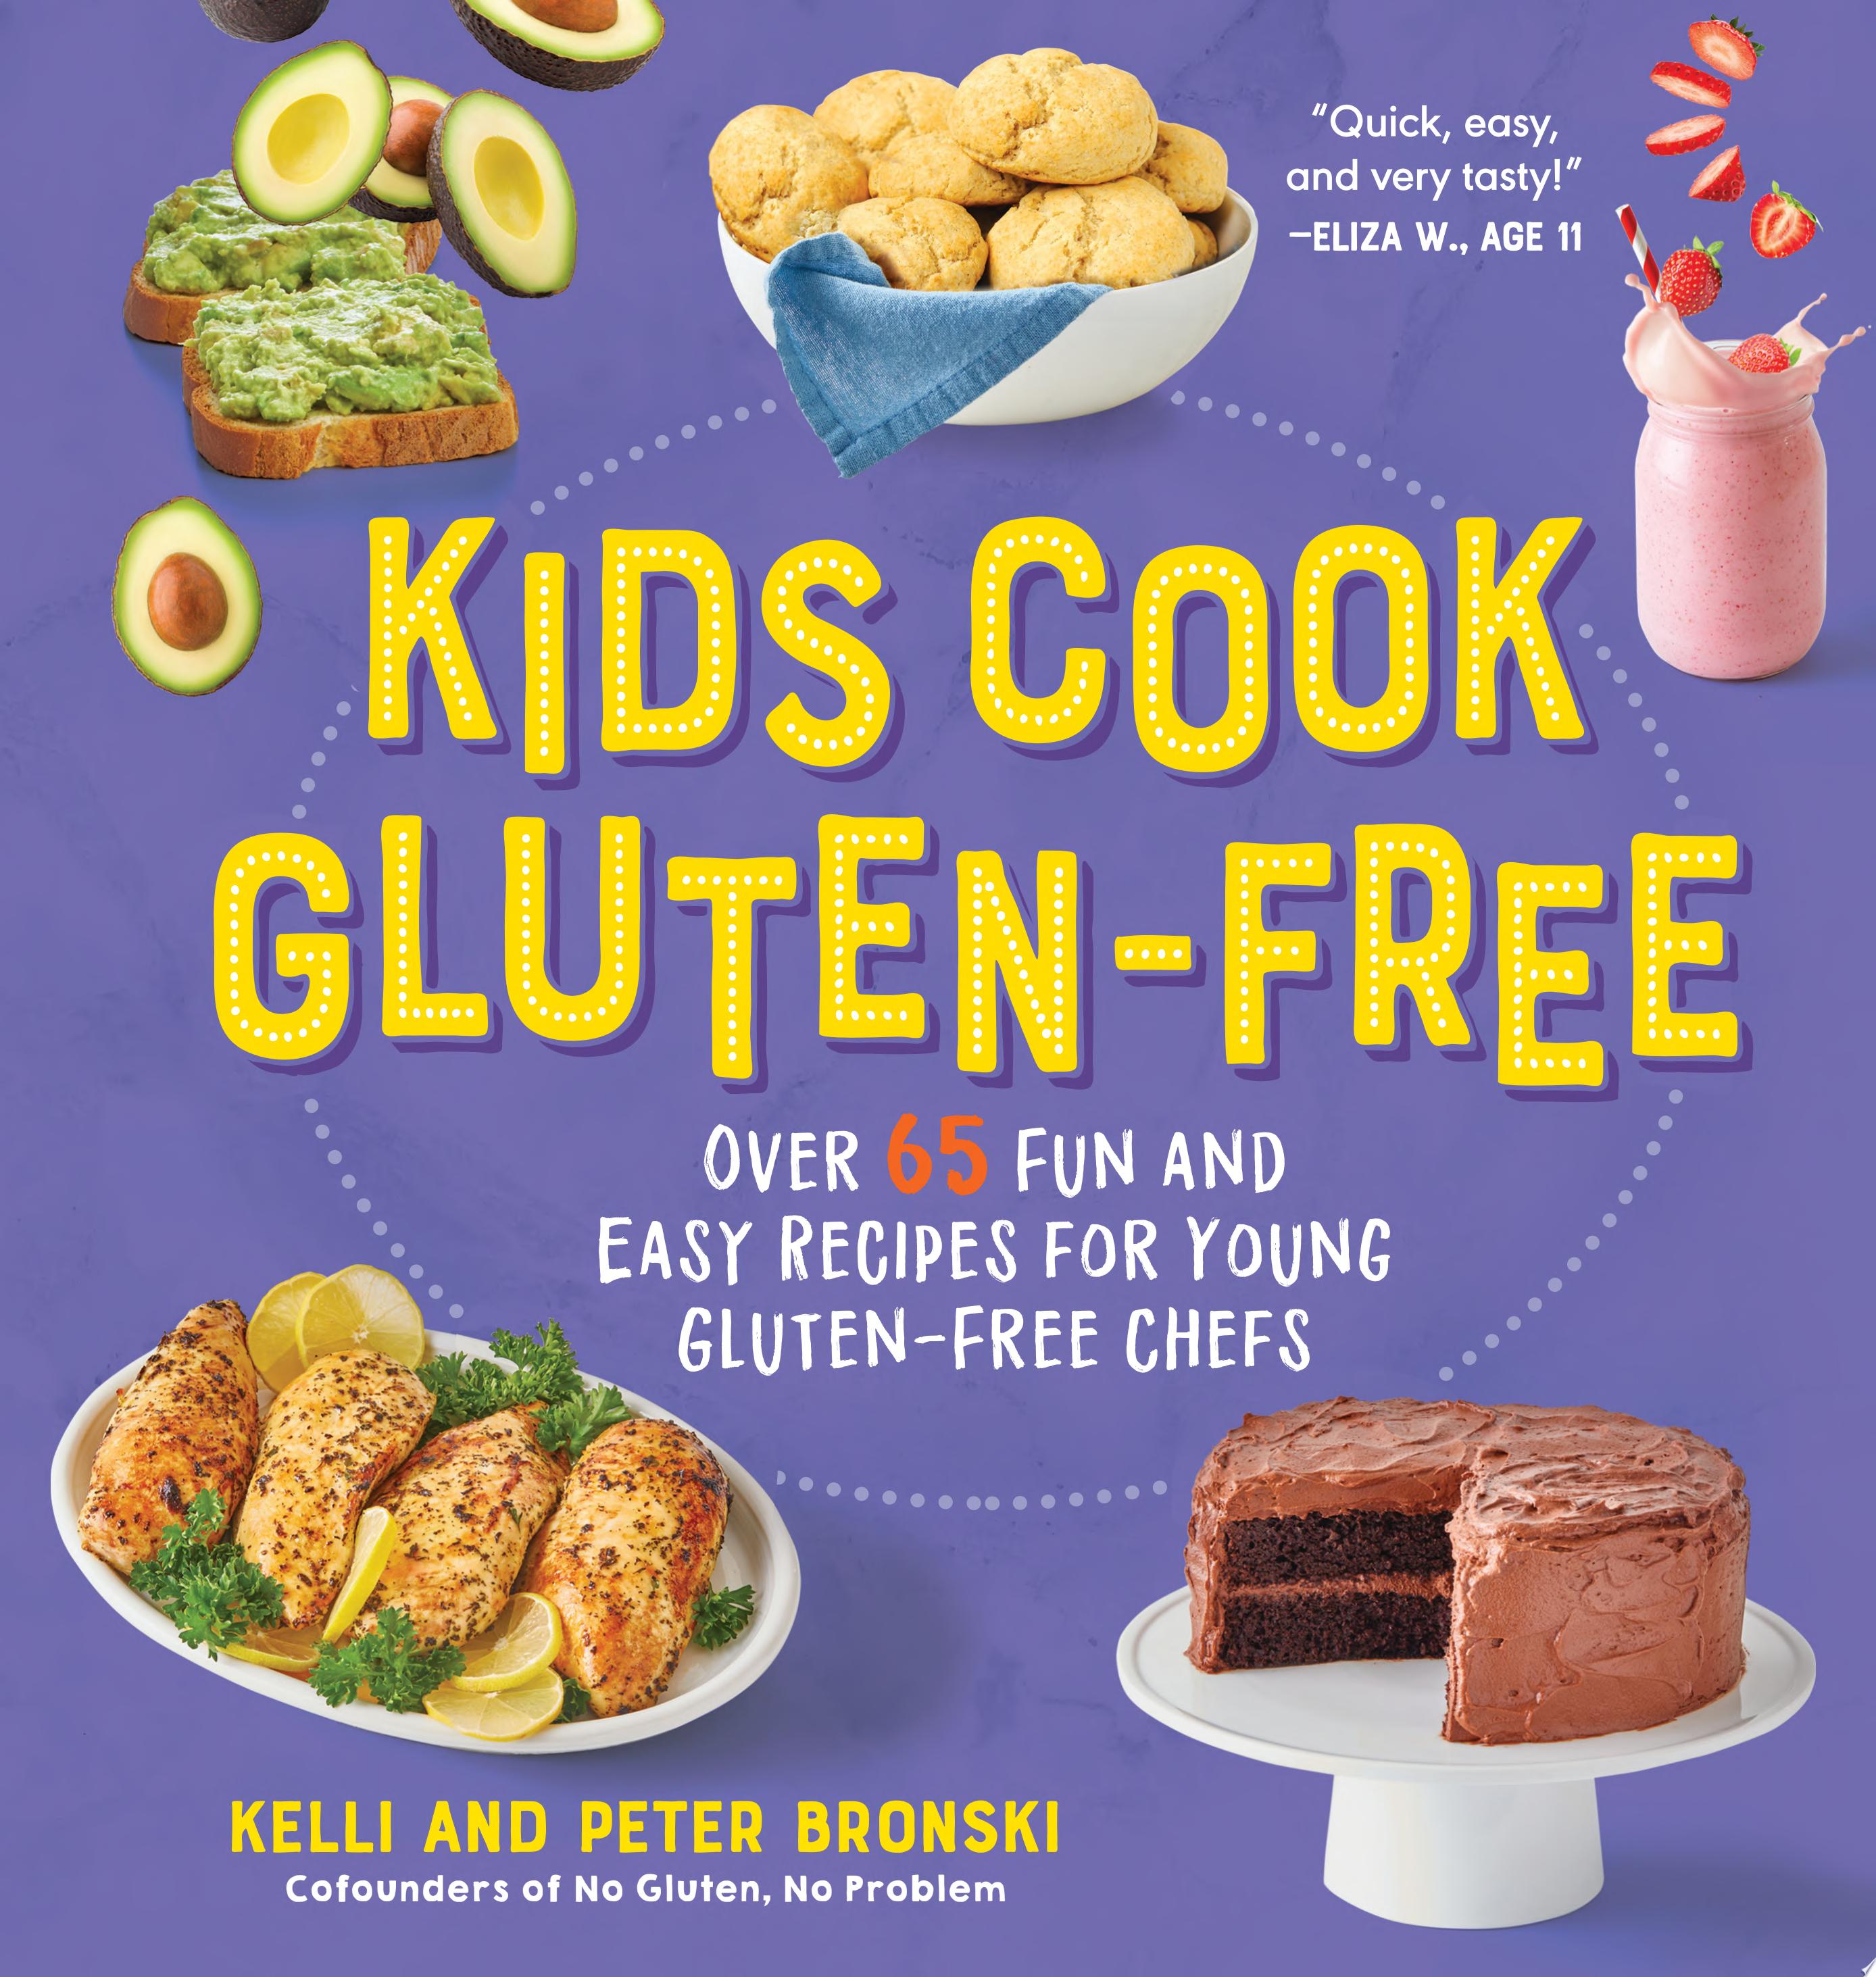 Image for "Kids Cook Gluten-Free"